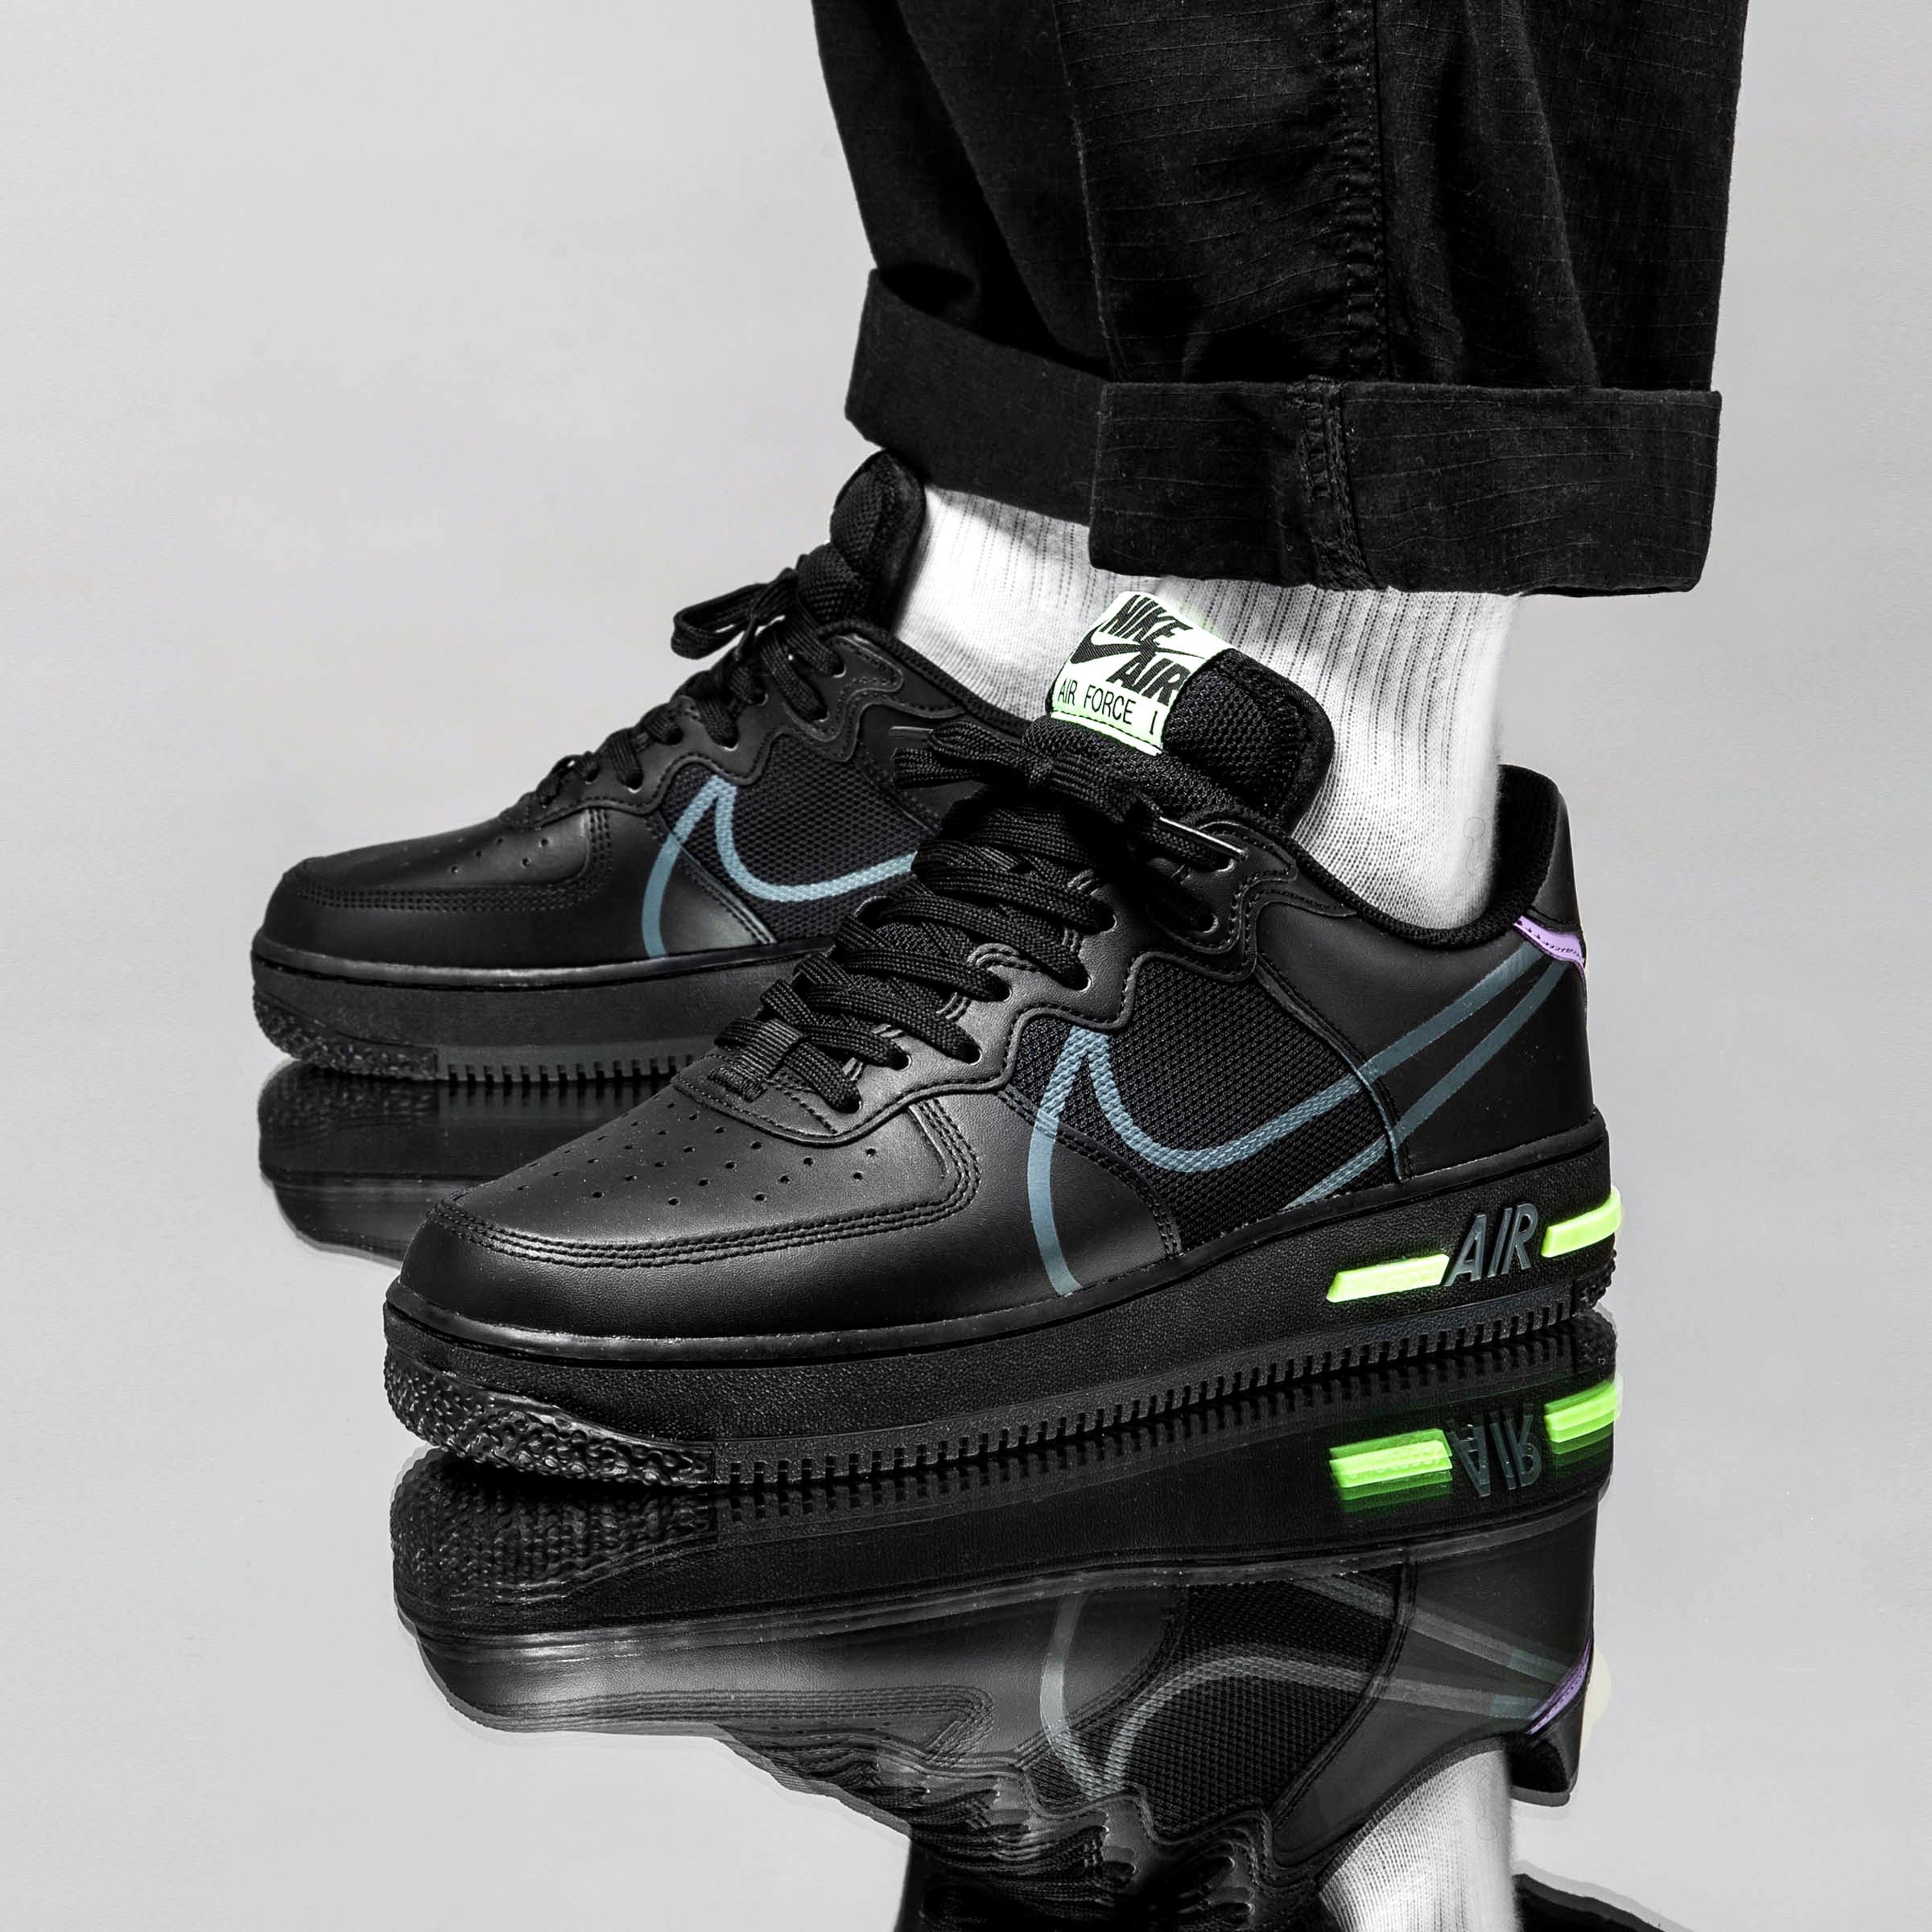 Titolo en Twitter: "#outNOW ⚫️ Nike Air Force 1 React D/MS/X in "Black/Violet Star/Volt" Link ➡️ https://t.co/AozRb60IzQ US 7 (40) - 12 (46) style code 🔎 CD4366-001⁠⠀⁠ sizerun GS :